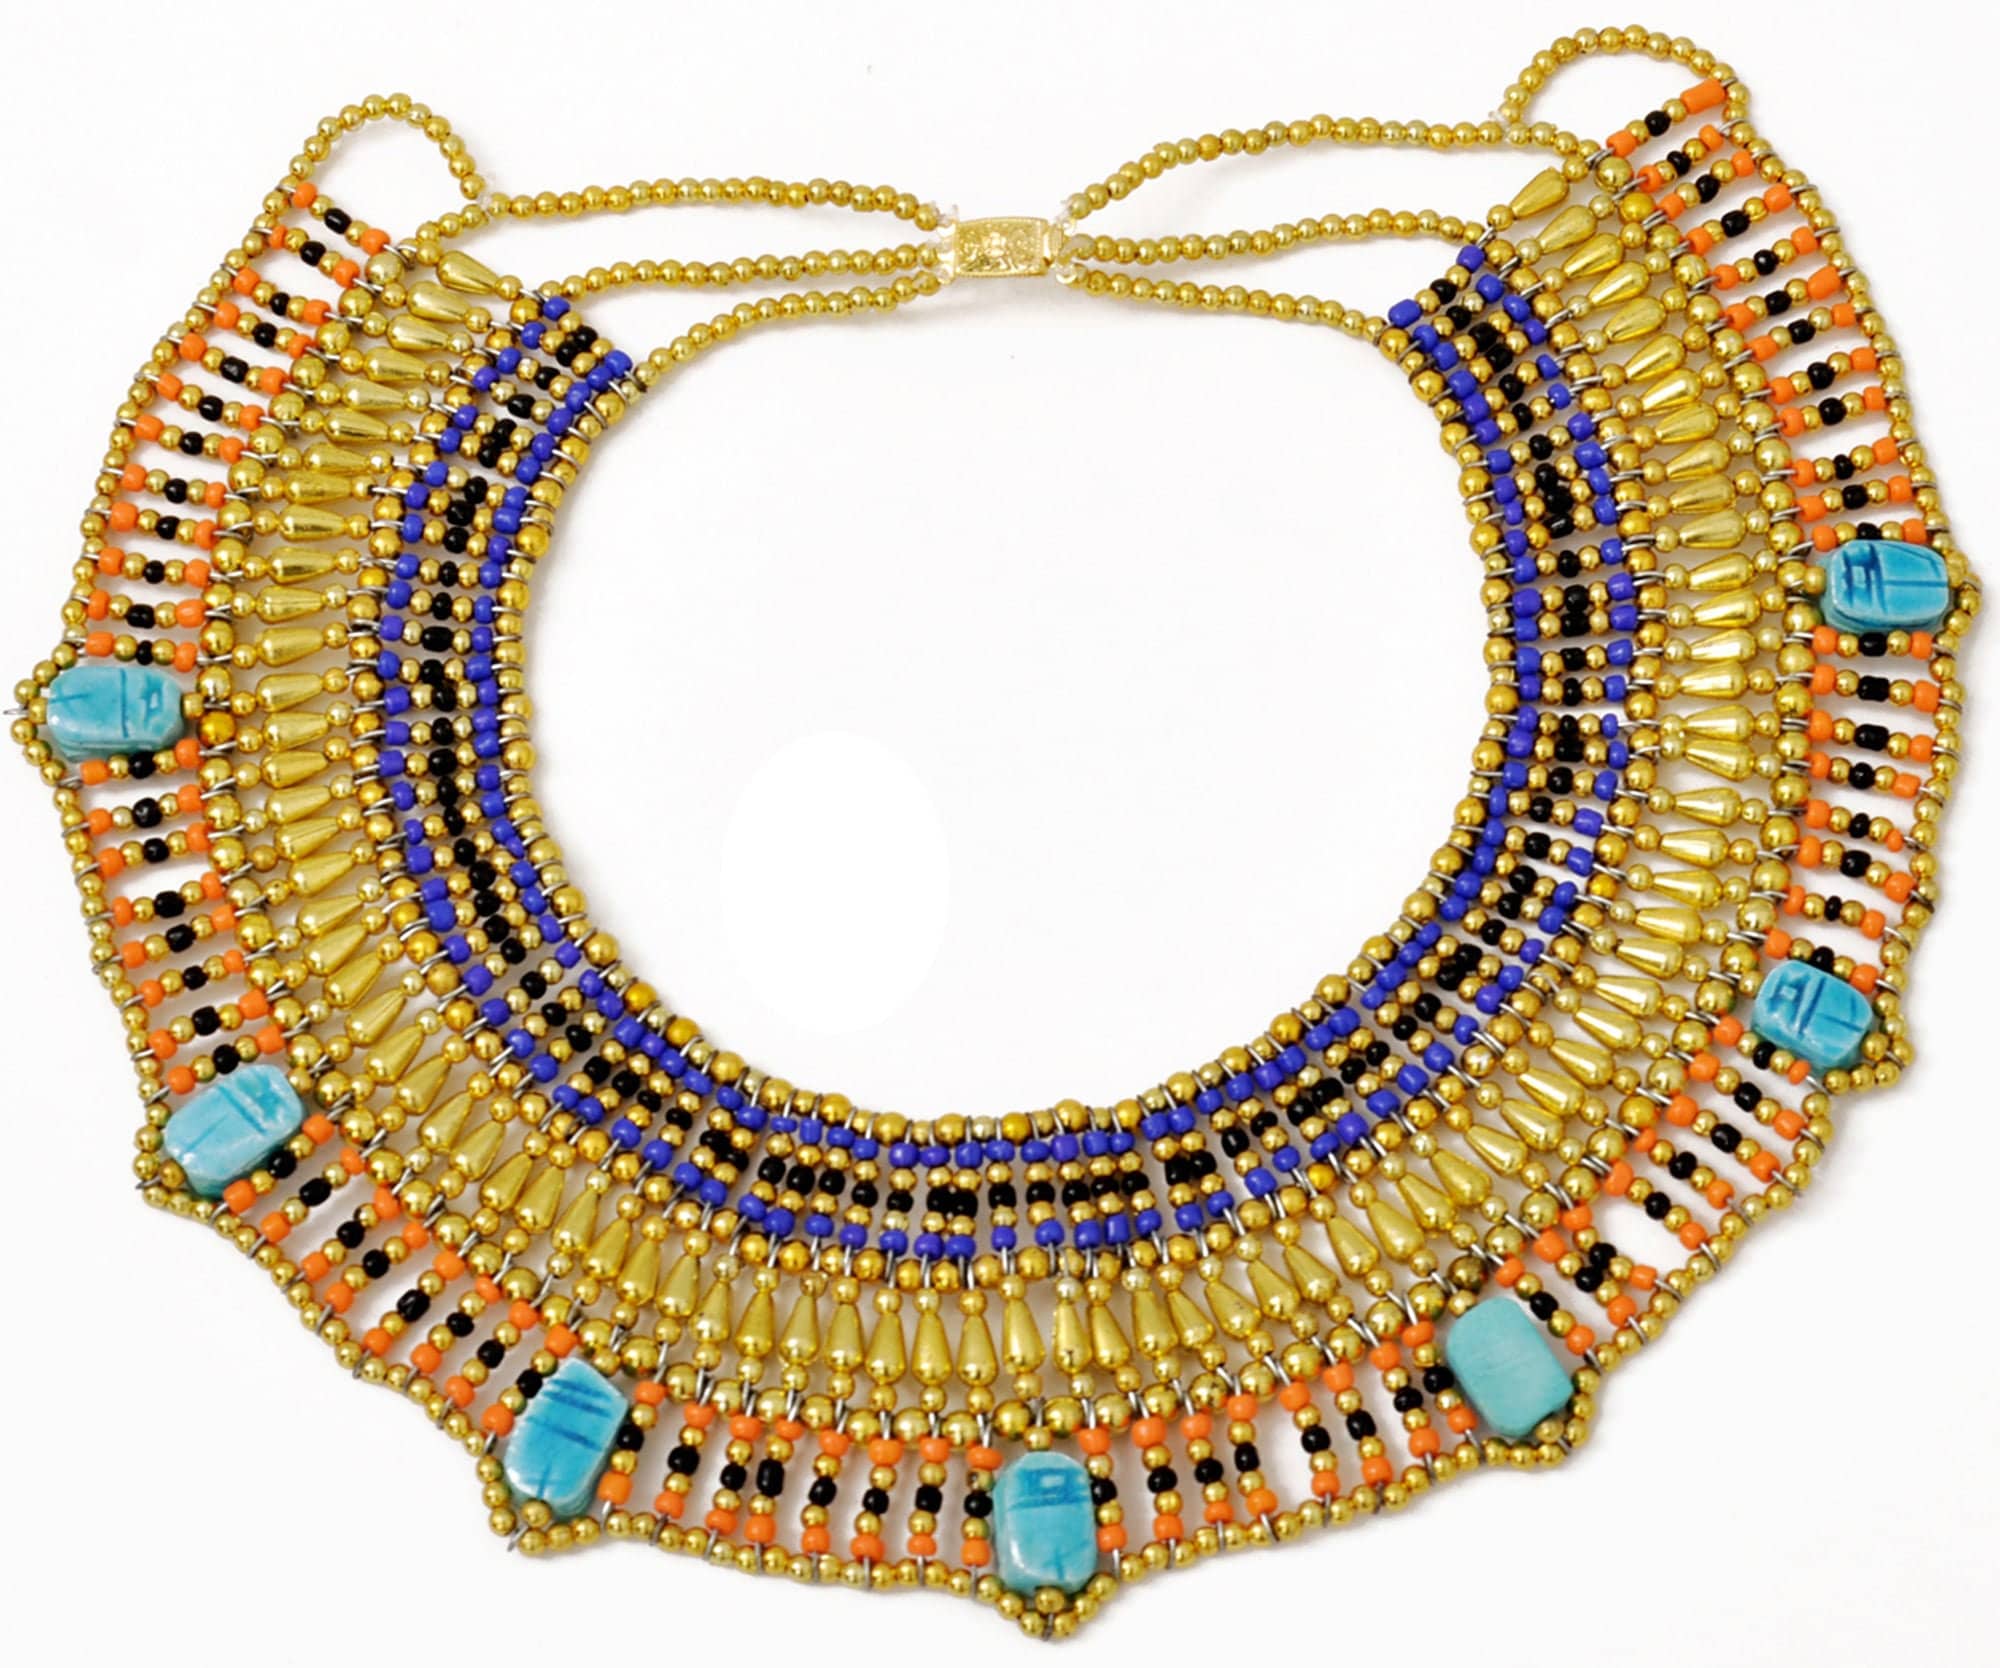 Bangladesh renere Uenighed Cleopatra Egyptian Collar Necklace Design Costume Accessories - Etsy